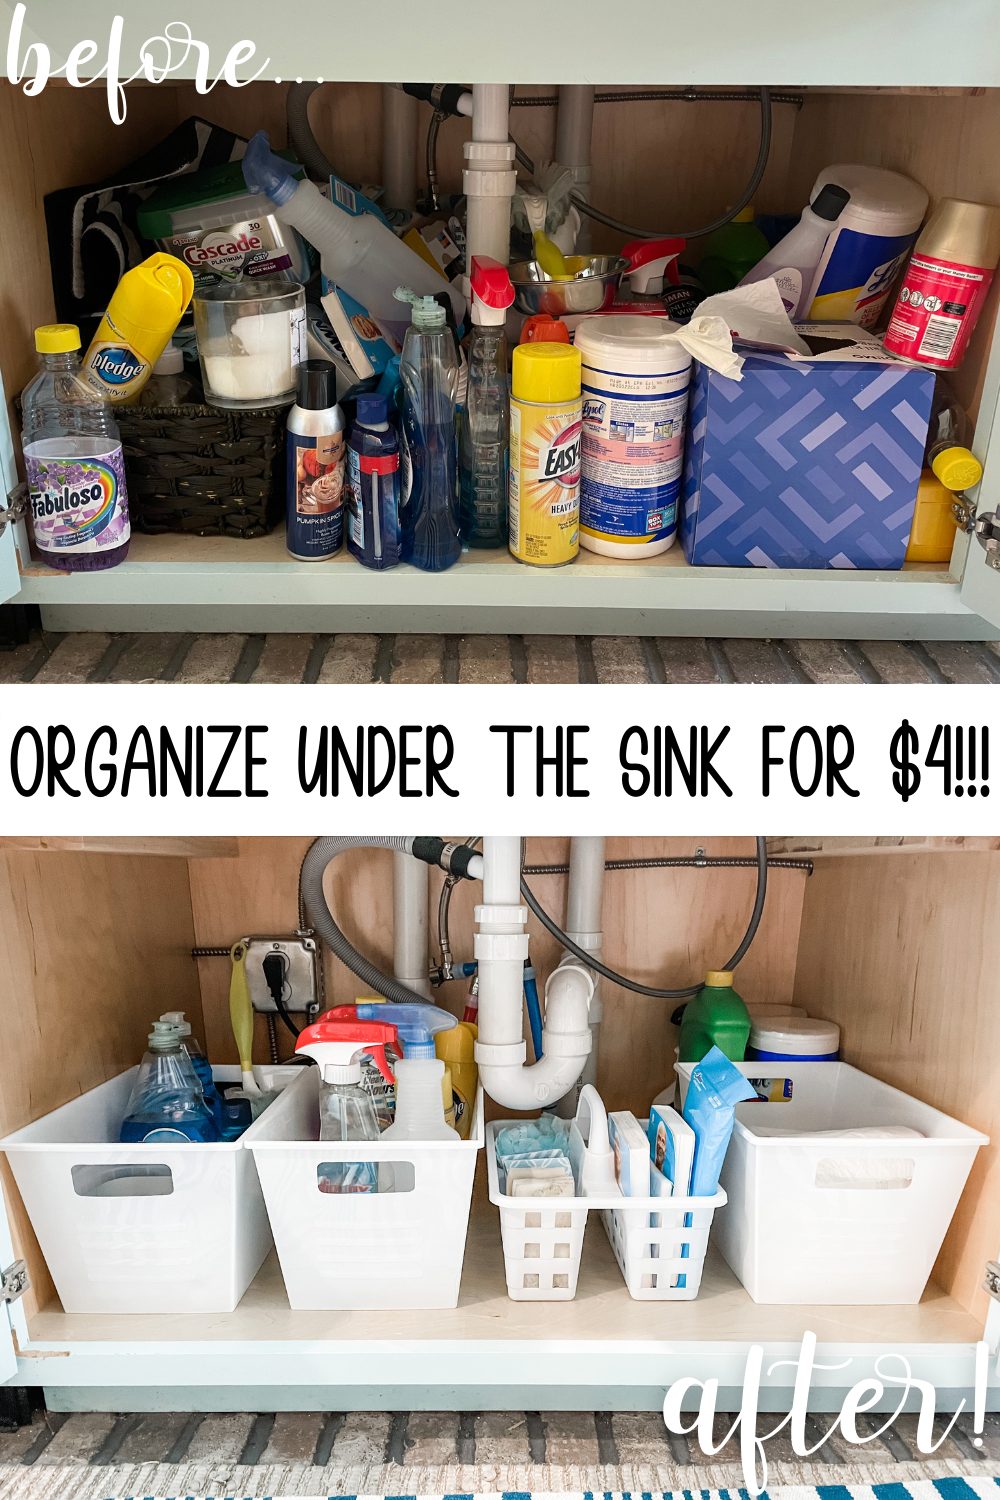 https://www.re-fabbed.com/wp-content/uploads/2021/06/Organize-under-the-sink-for-4.jpg